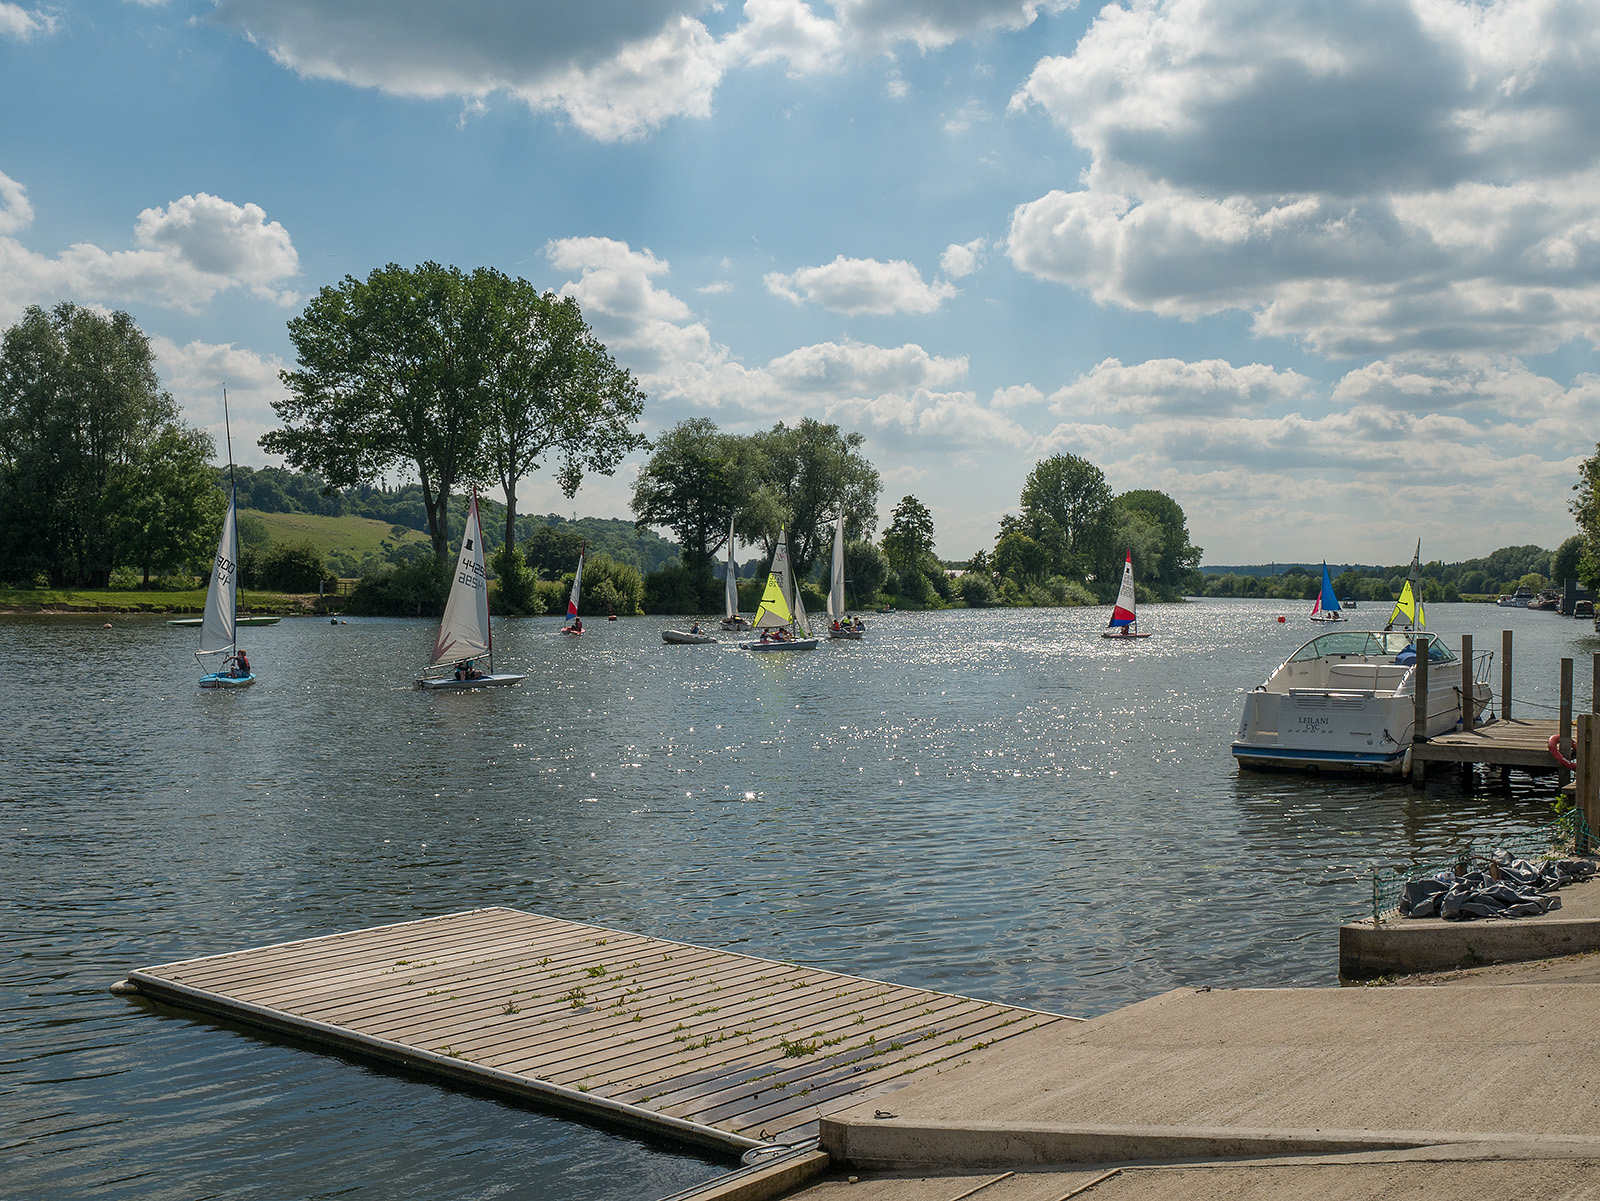 Boats from Upper Thames Sailing Club on the river